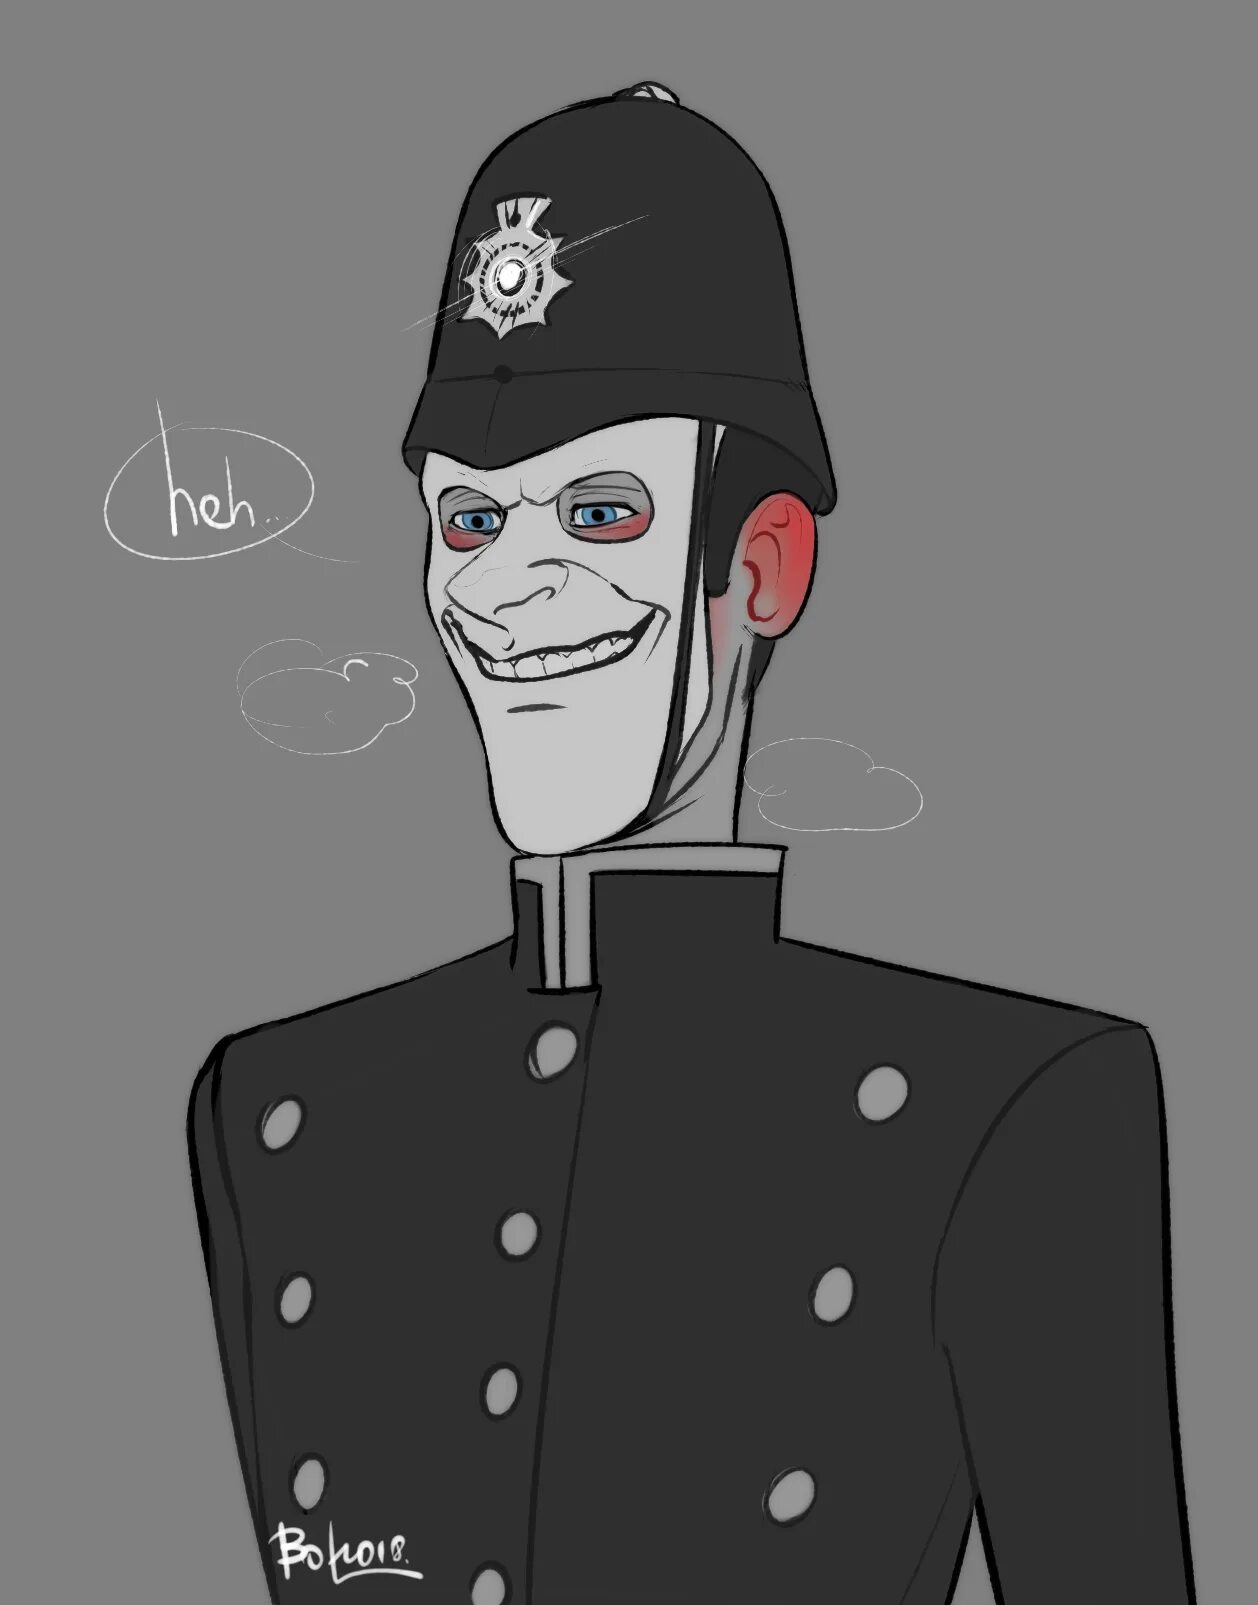 Boothill x reader. We Happy few констебль Бобби. We Happy few констебль Бобби арт. We Happy few Бобби.